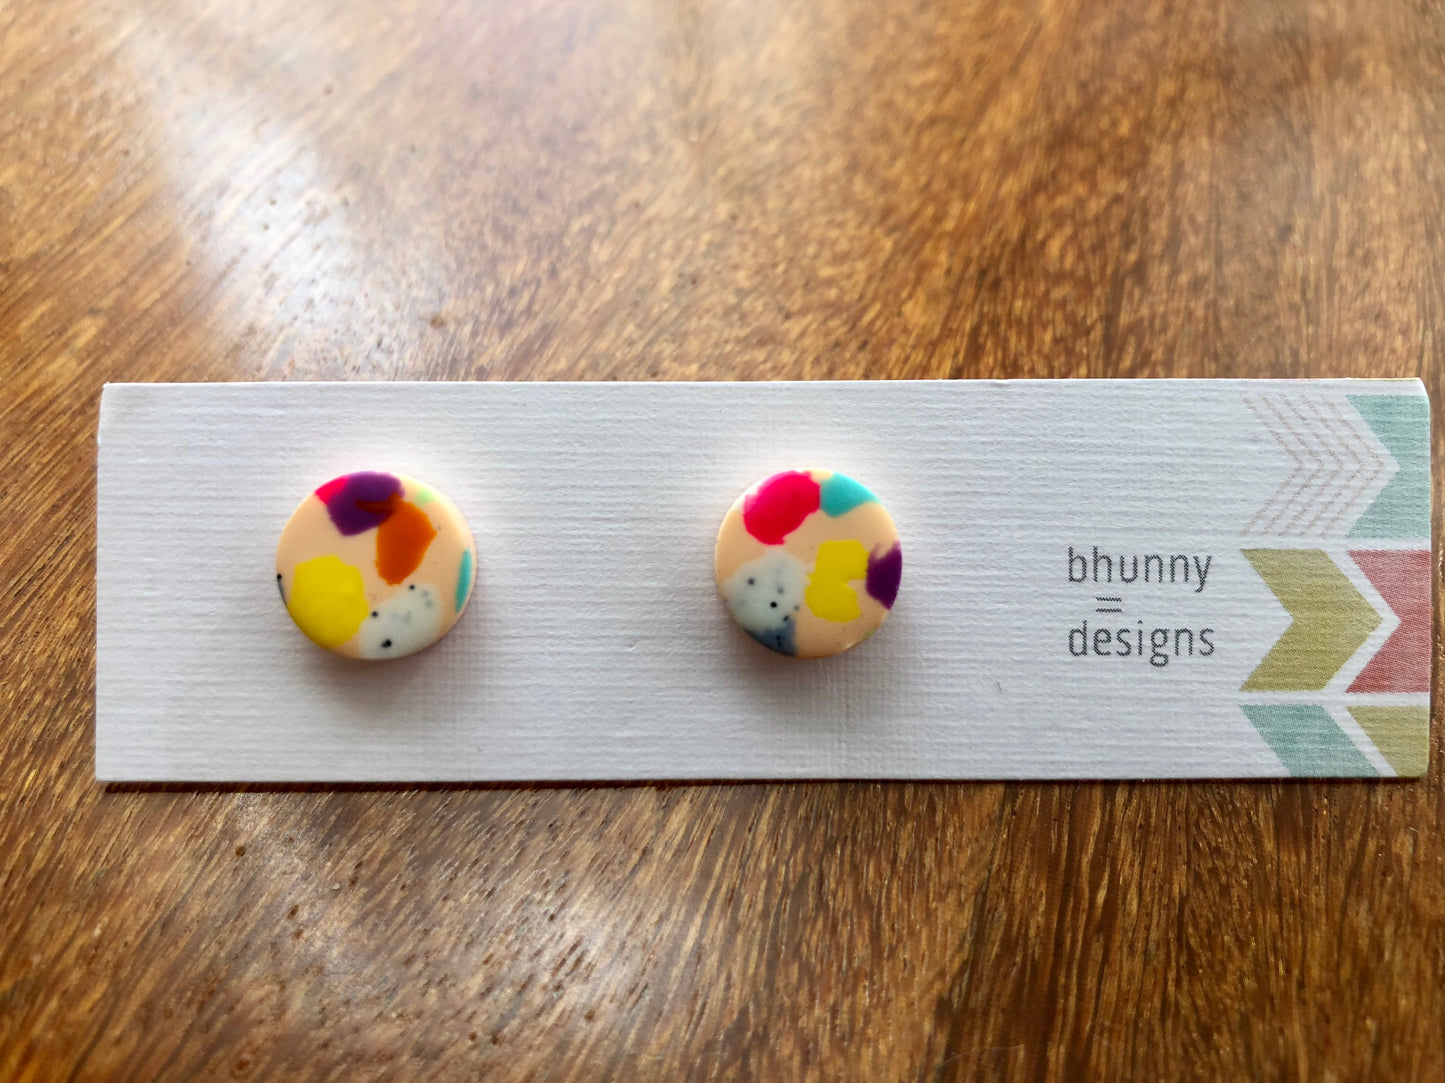 Load image into Gallery viewer, EARRINGS | Bhunny Designs Earrings
